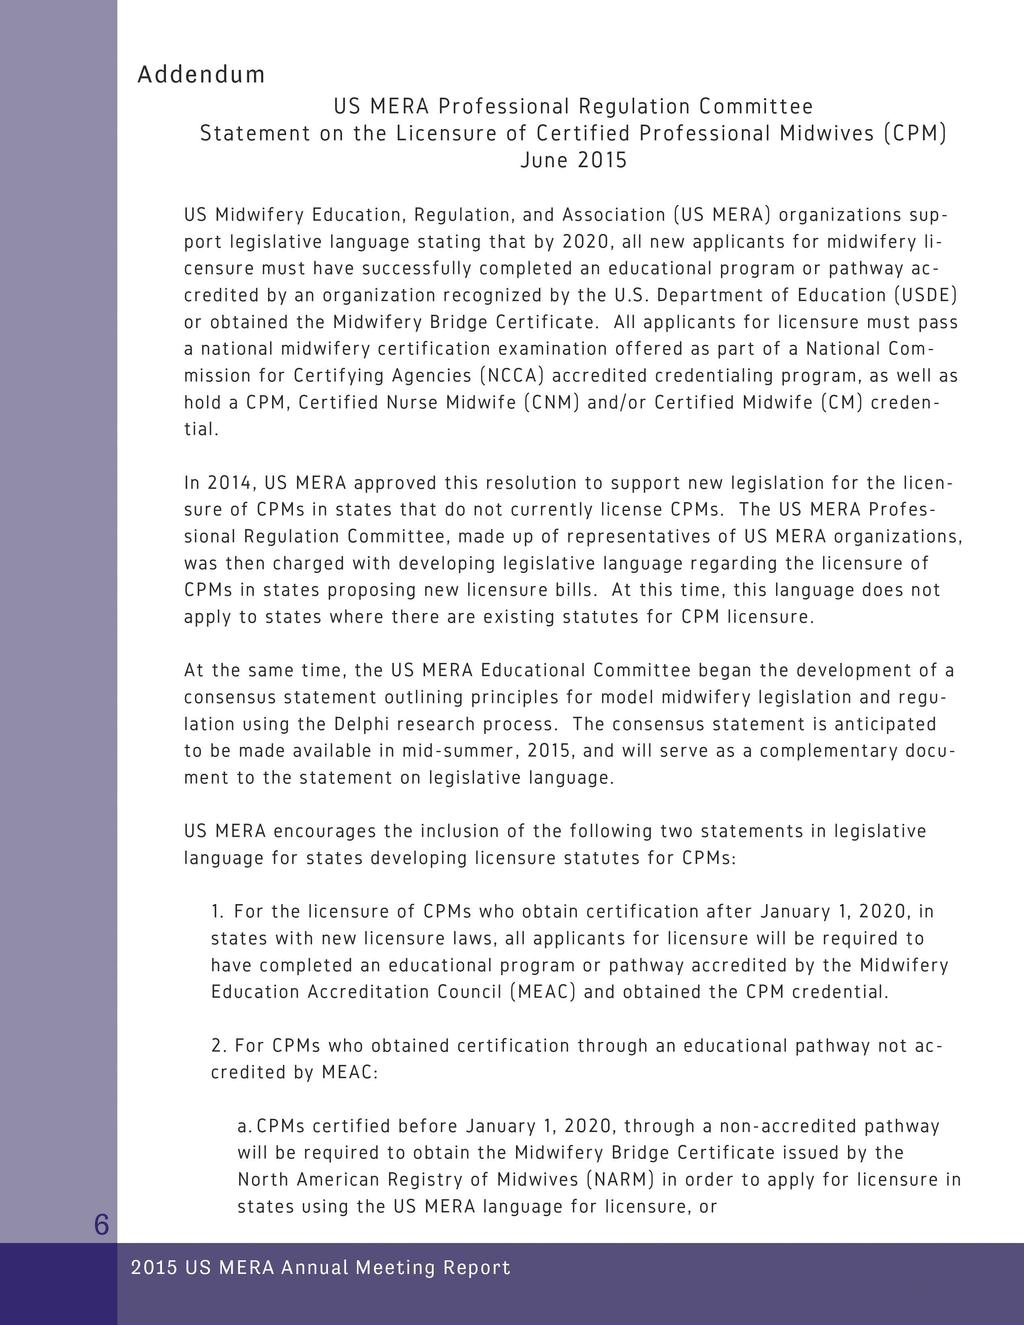 Addendum US MERA Professional Regulation Committee Statement on the Licensure of Certified Professional Midwives (CPM) June 2015 US Midwifery Education, Regulation, and Association (US MERA)